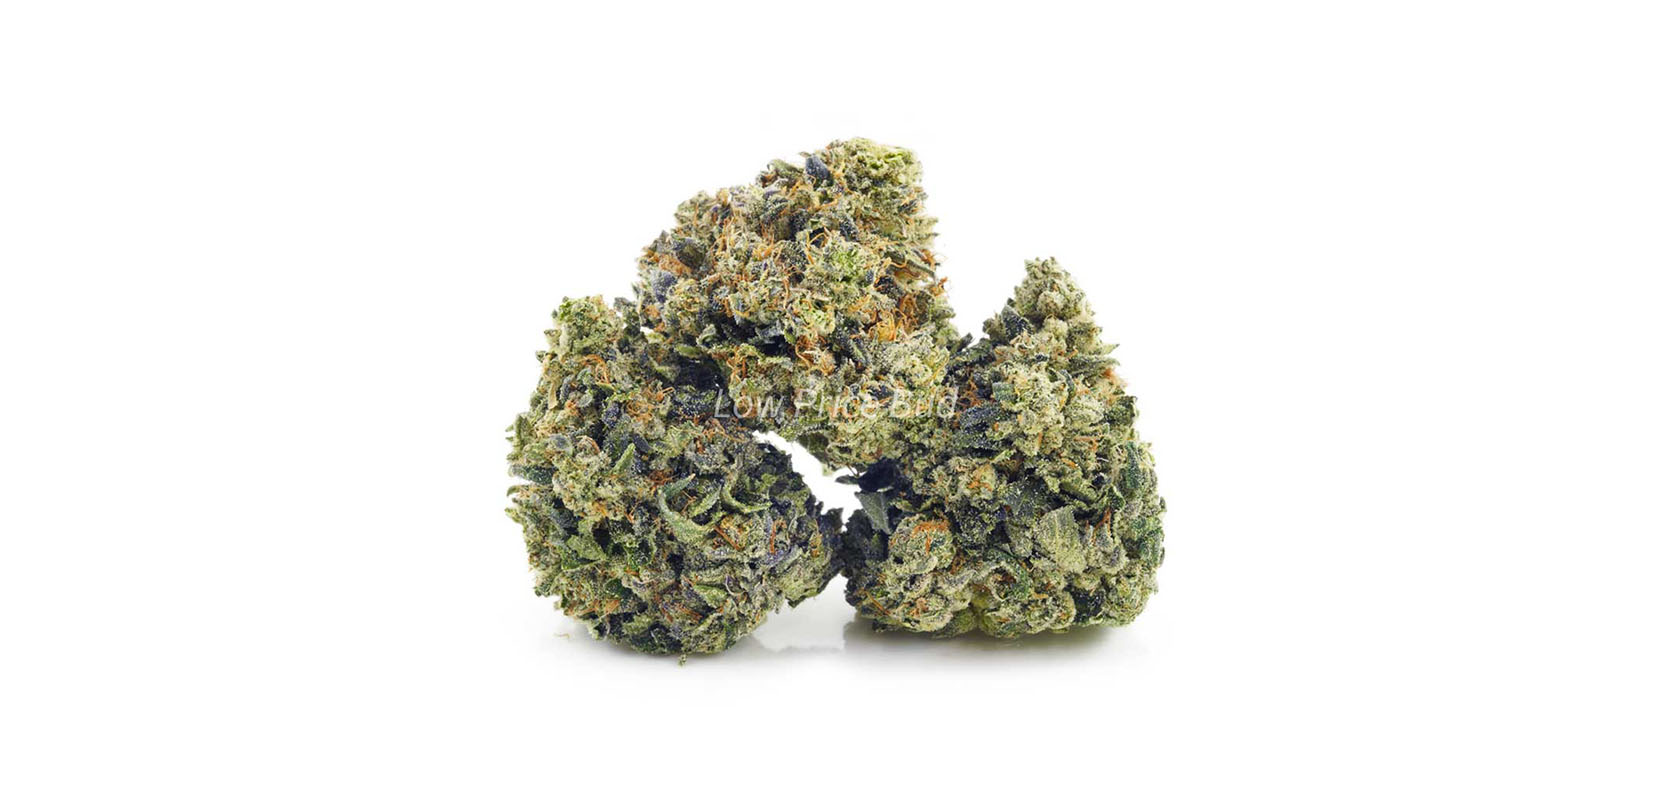 White Death budget buds. online dispensary canada. buy online weeds. weed online canada.